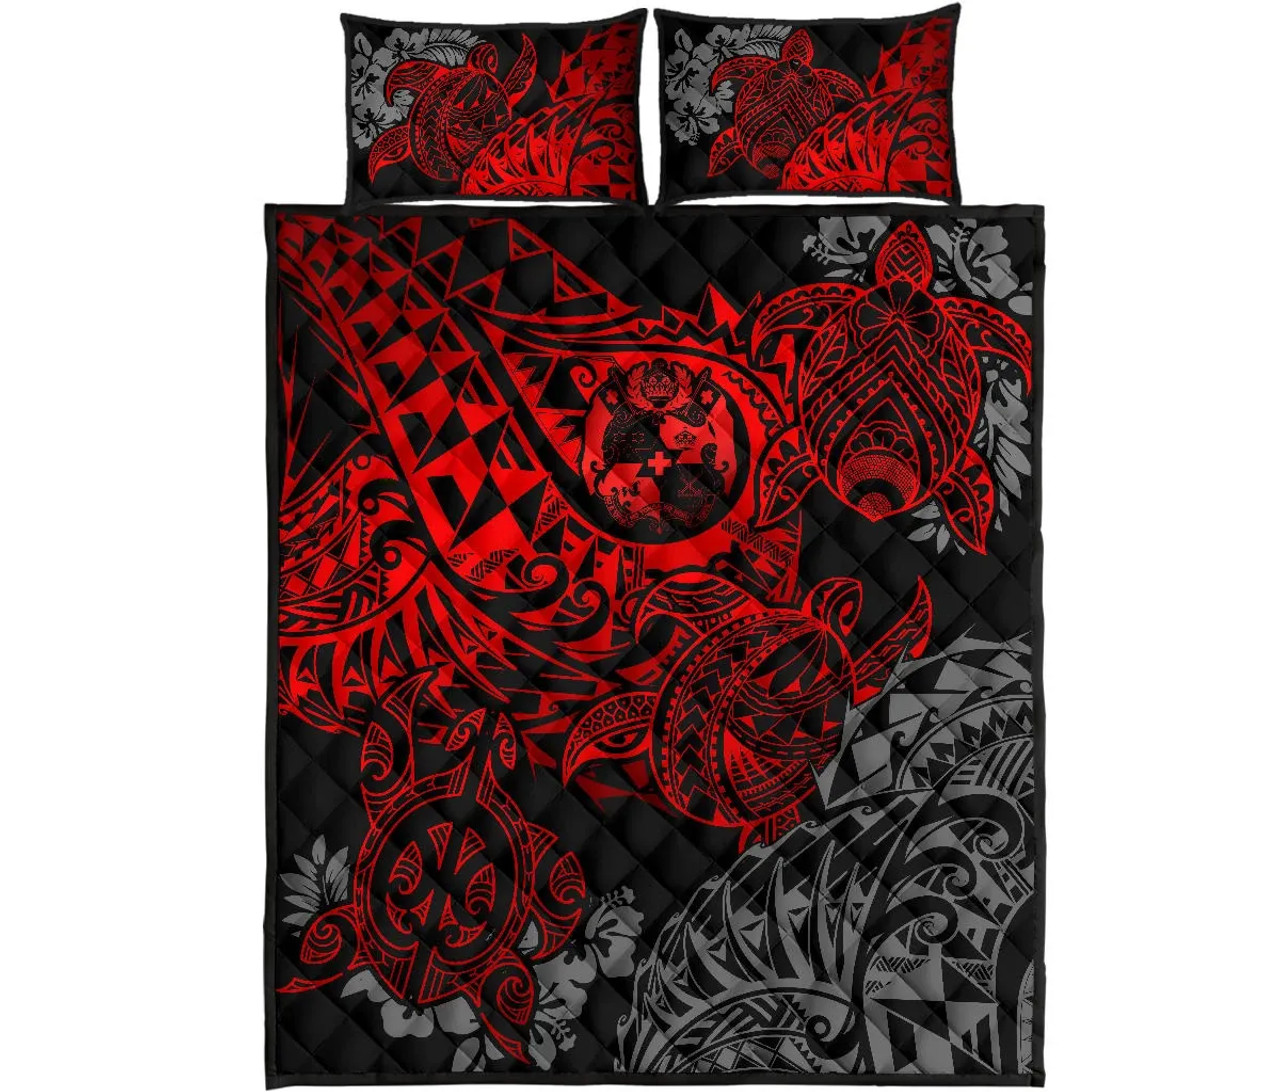 Tonga Polynesian Quilt Bed Set - Red Turtle Flowing 5